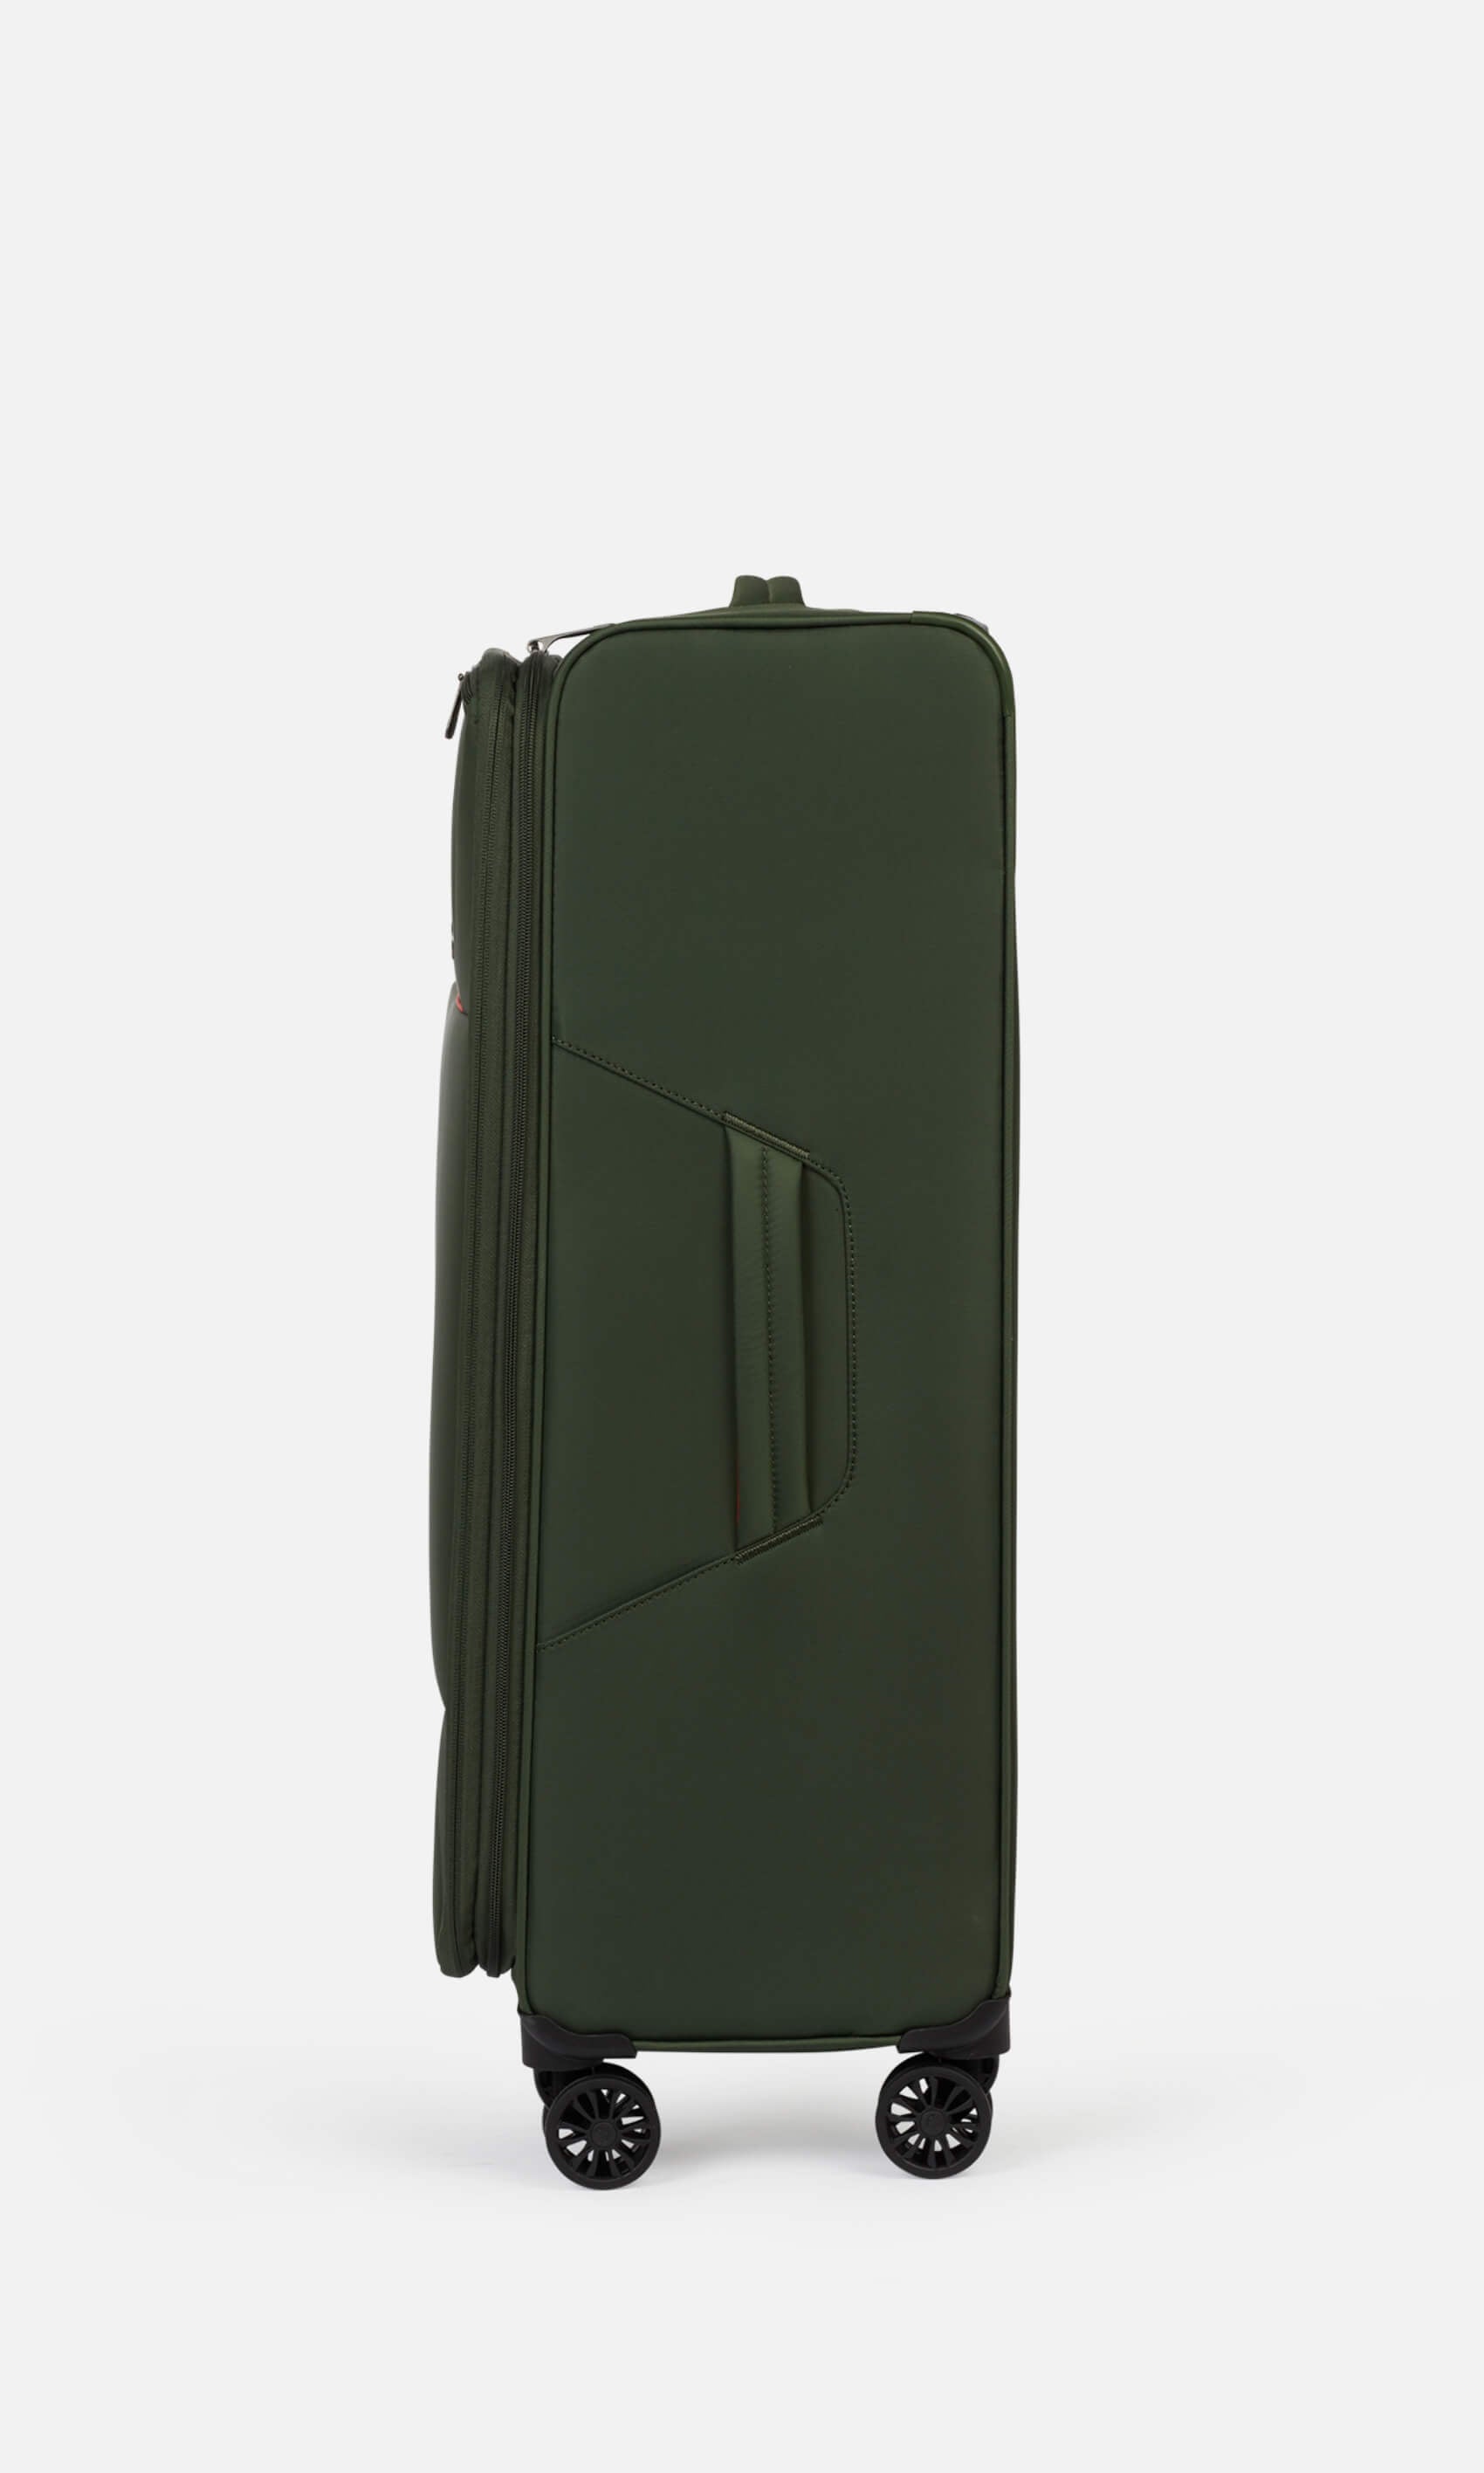 Most Durable Luggage For Long-Haul Travel